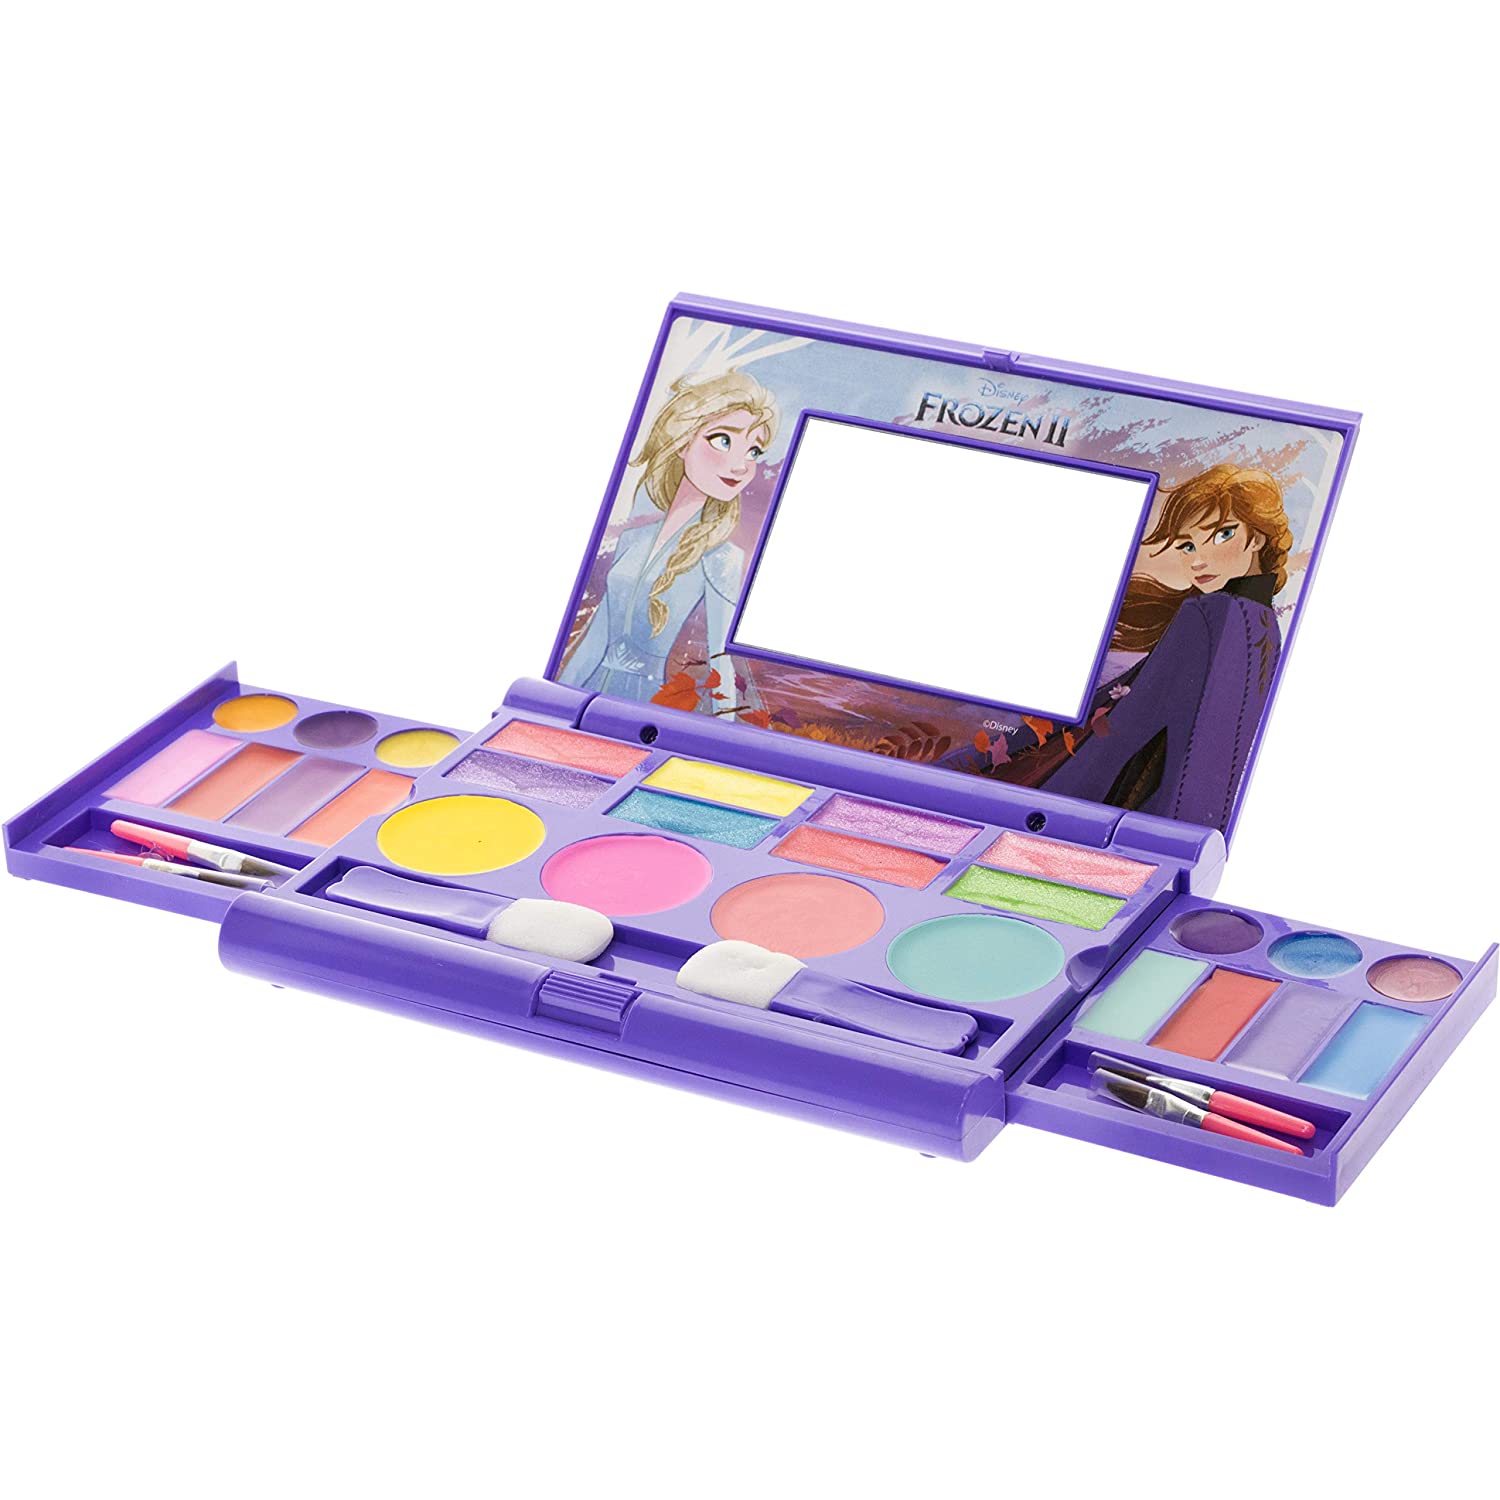 Disney Frozen 2 - Townley Girl Cosmetic Compact Set with Mirror 22 lip glosses, 4 Body Shines, 6 Brushes Colorful Portable Foldable Washable Make Up Beauty Kit Box Set for Girls Kids Toddler